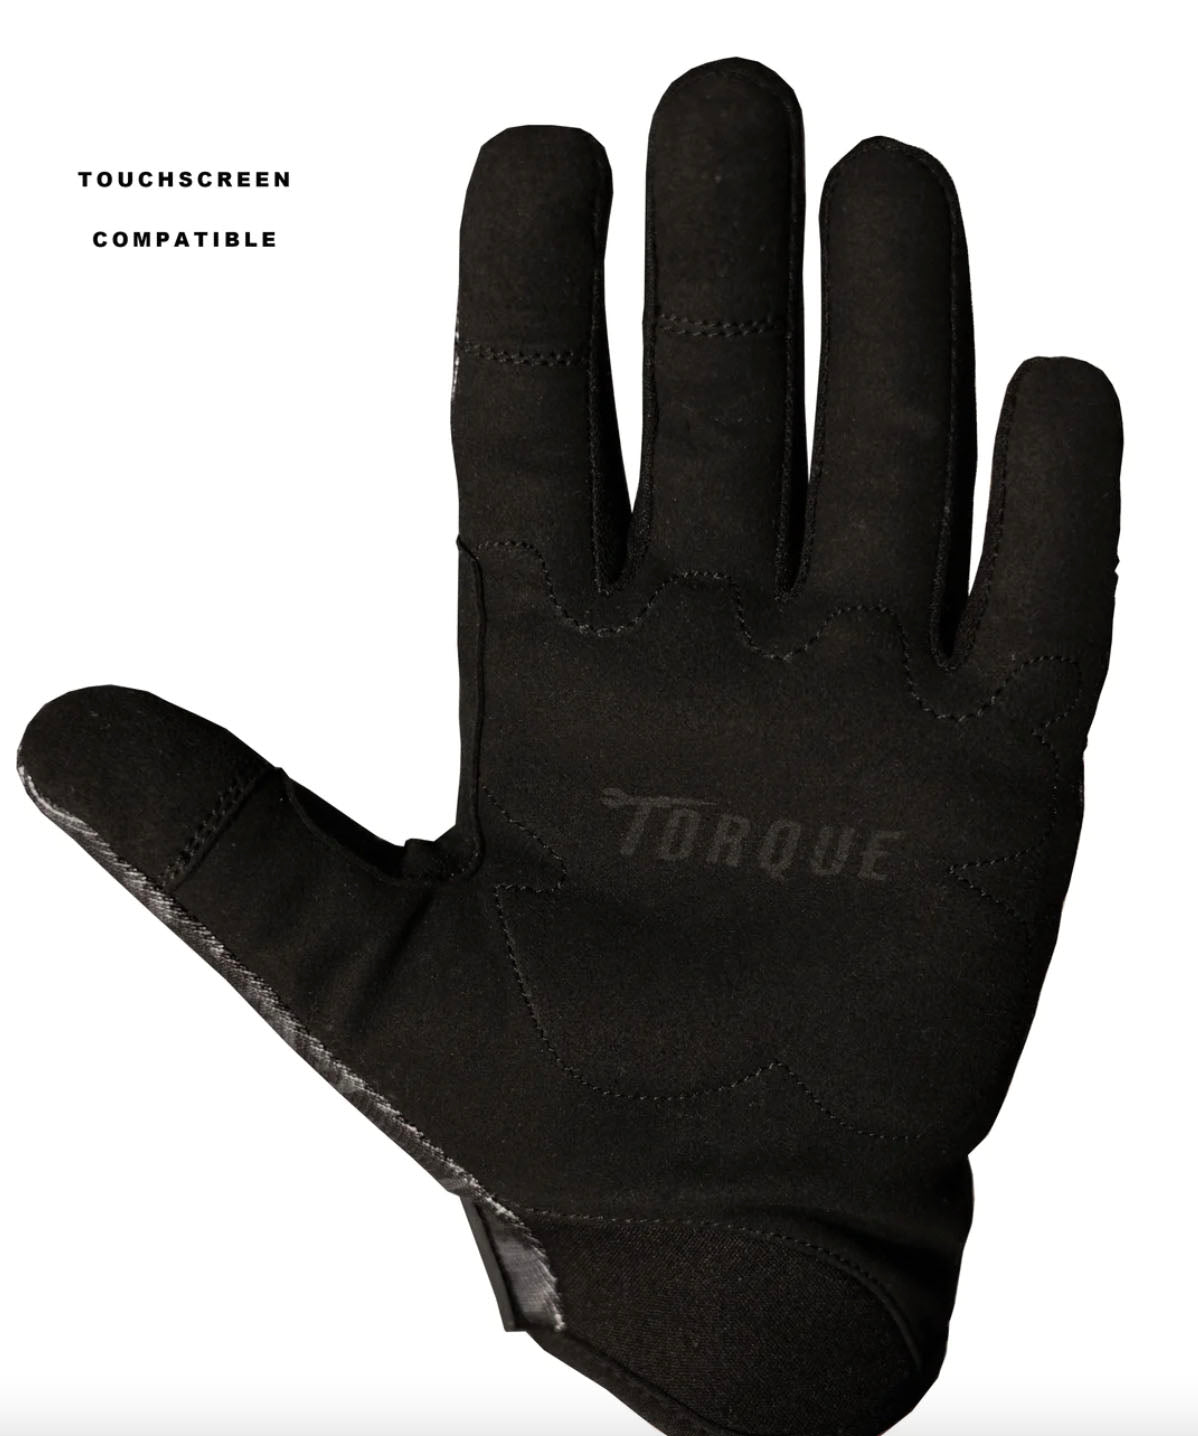 palm side of moto gloves with torque logo